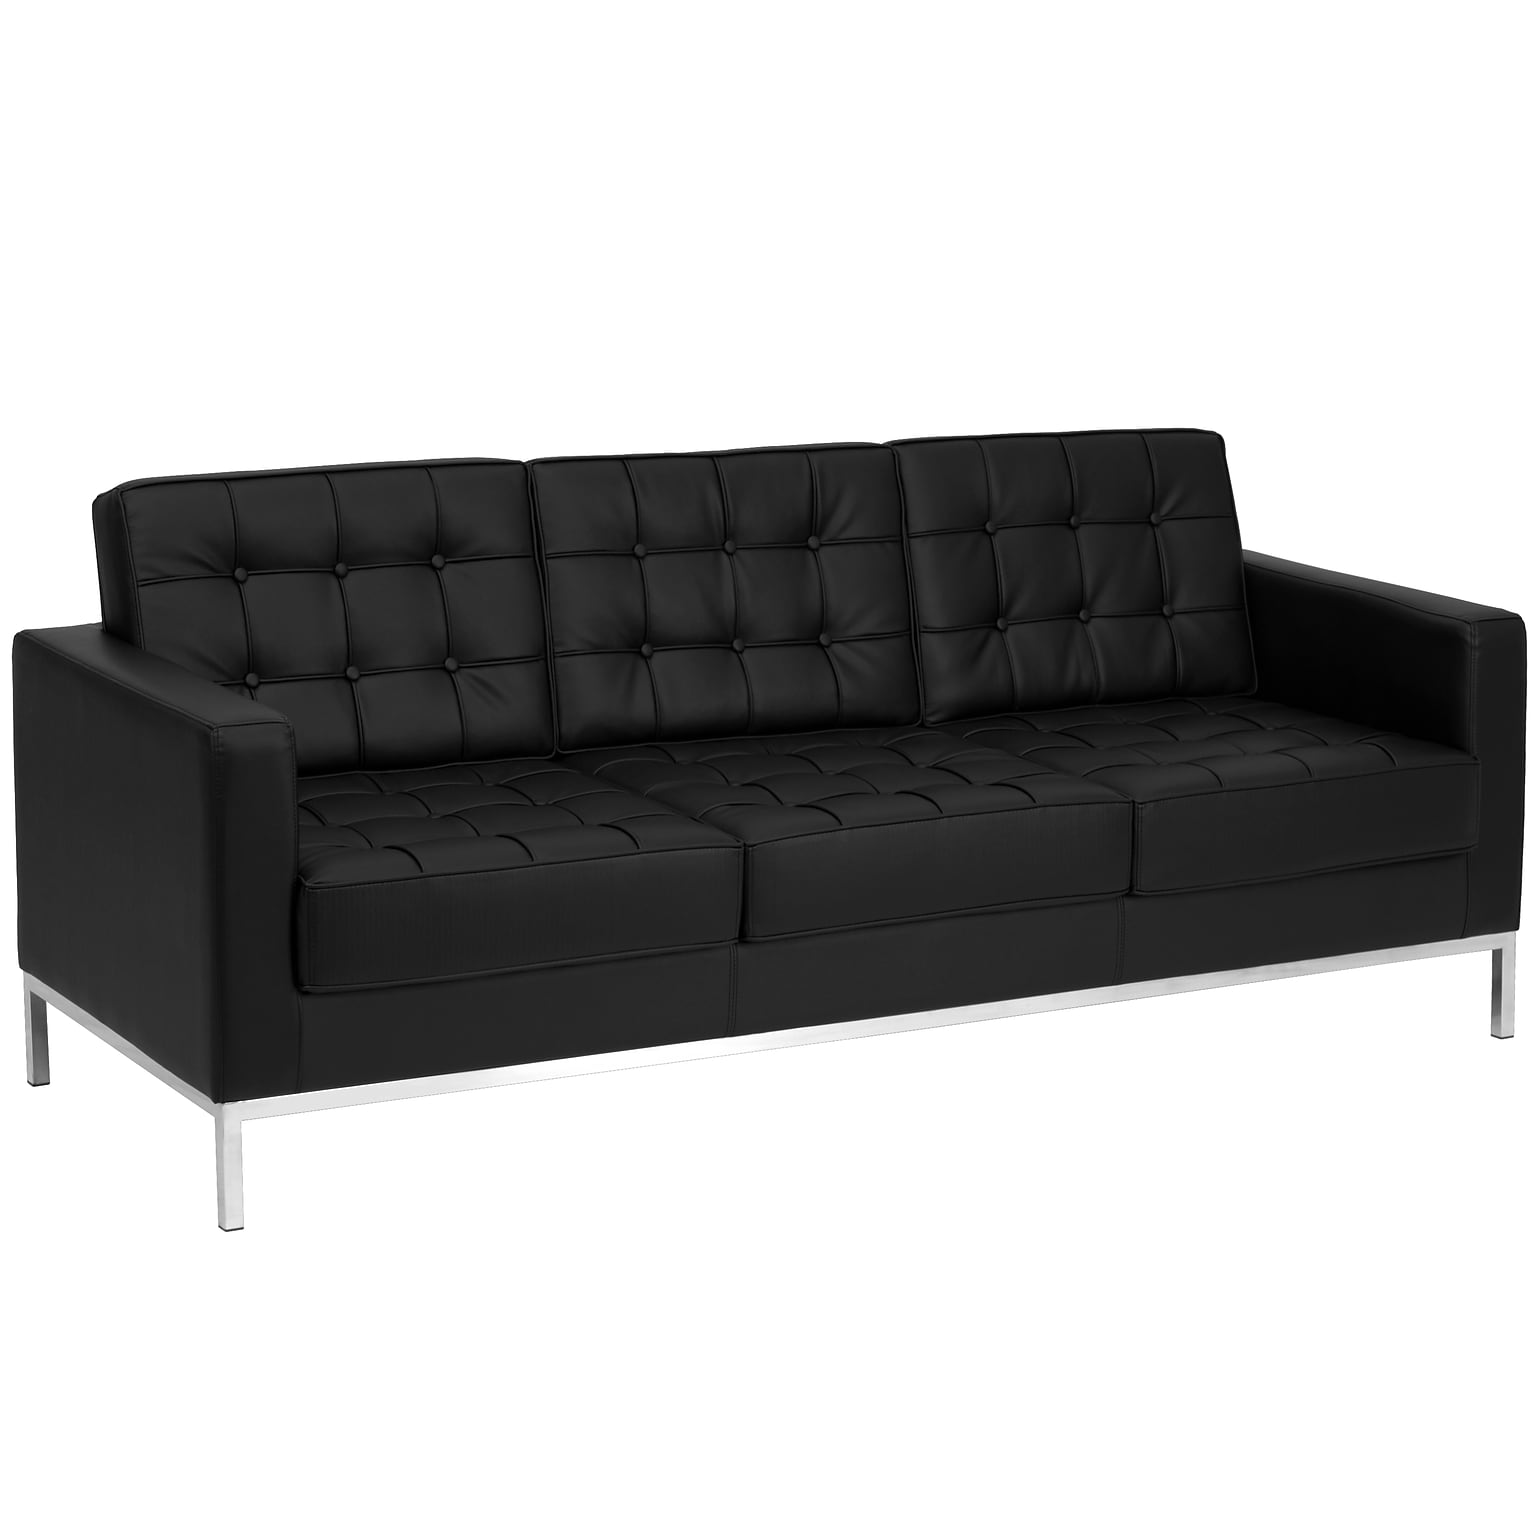 Flash Furniture HERCULES Lacey Series 80 LeatherSoft Sofa with Stainless Steel Frame, Black (ZBLACEY8312SOBK)